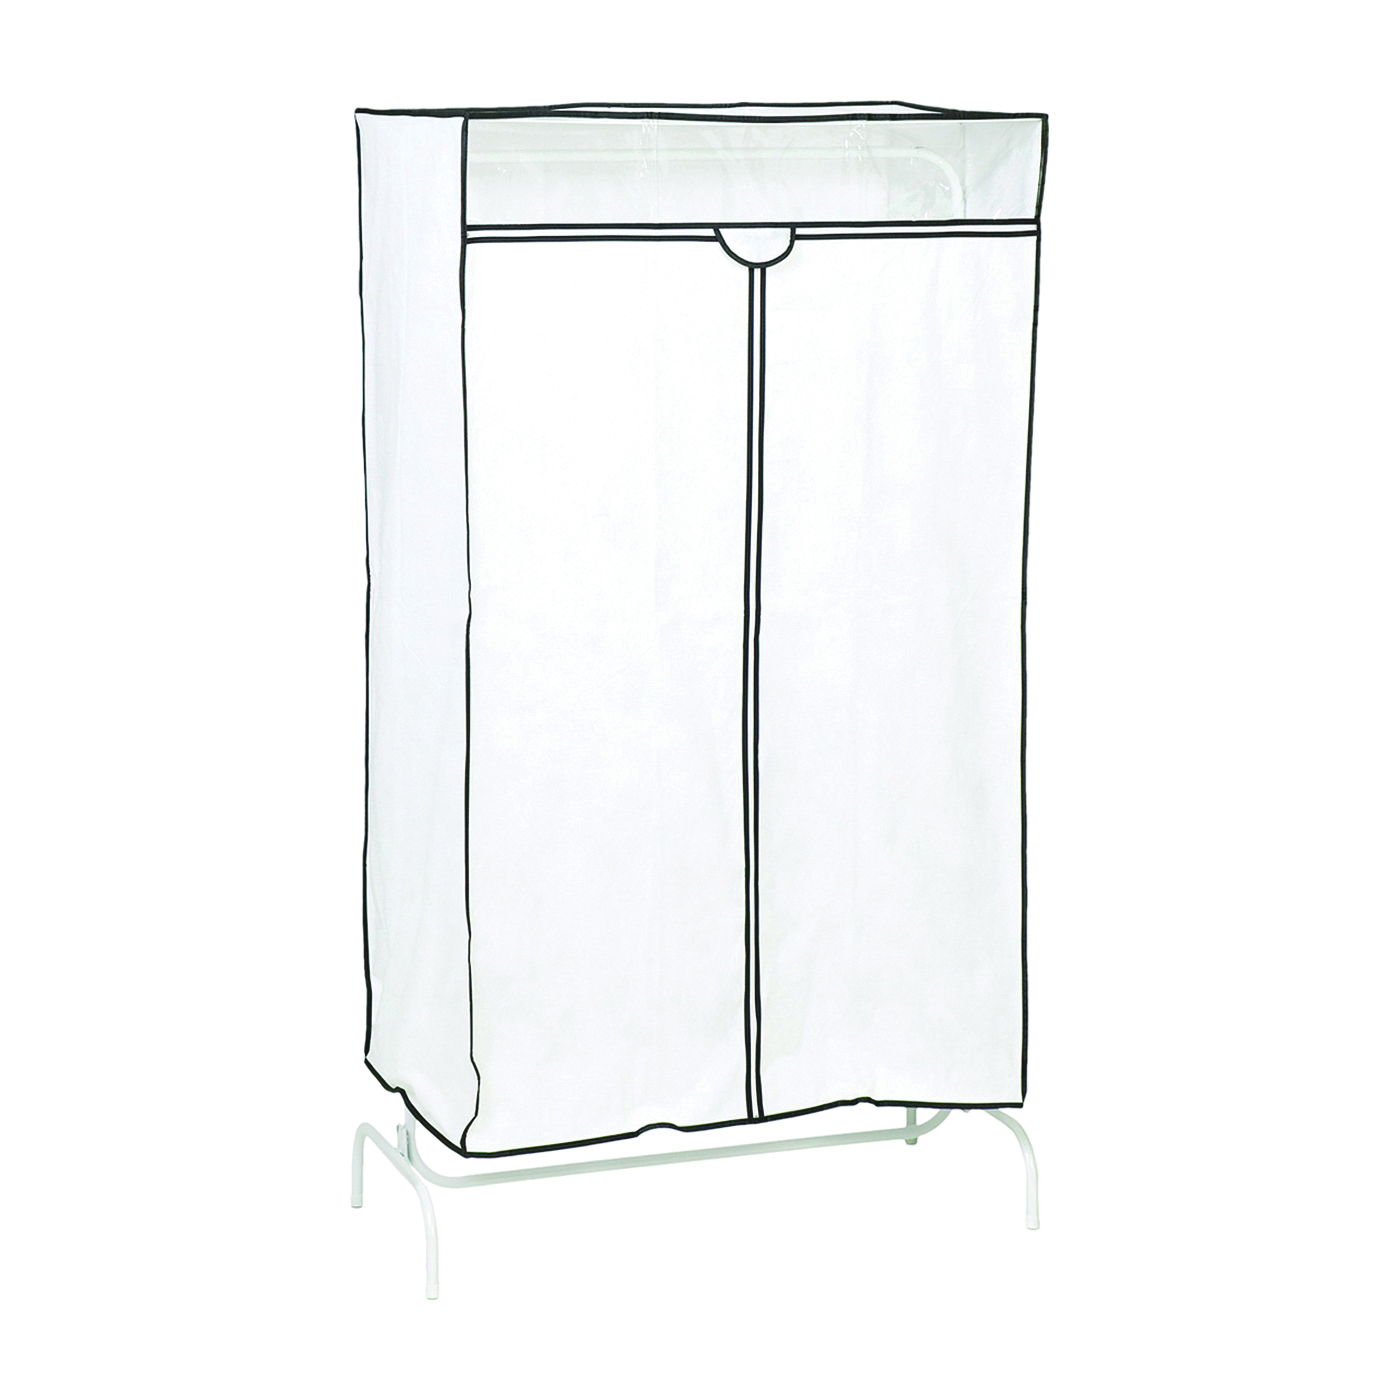 1095 Portable Closet, 34-1/4 in W, 64-1/4 in H, Steel